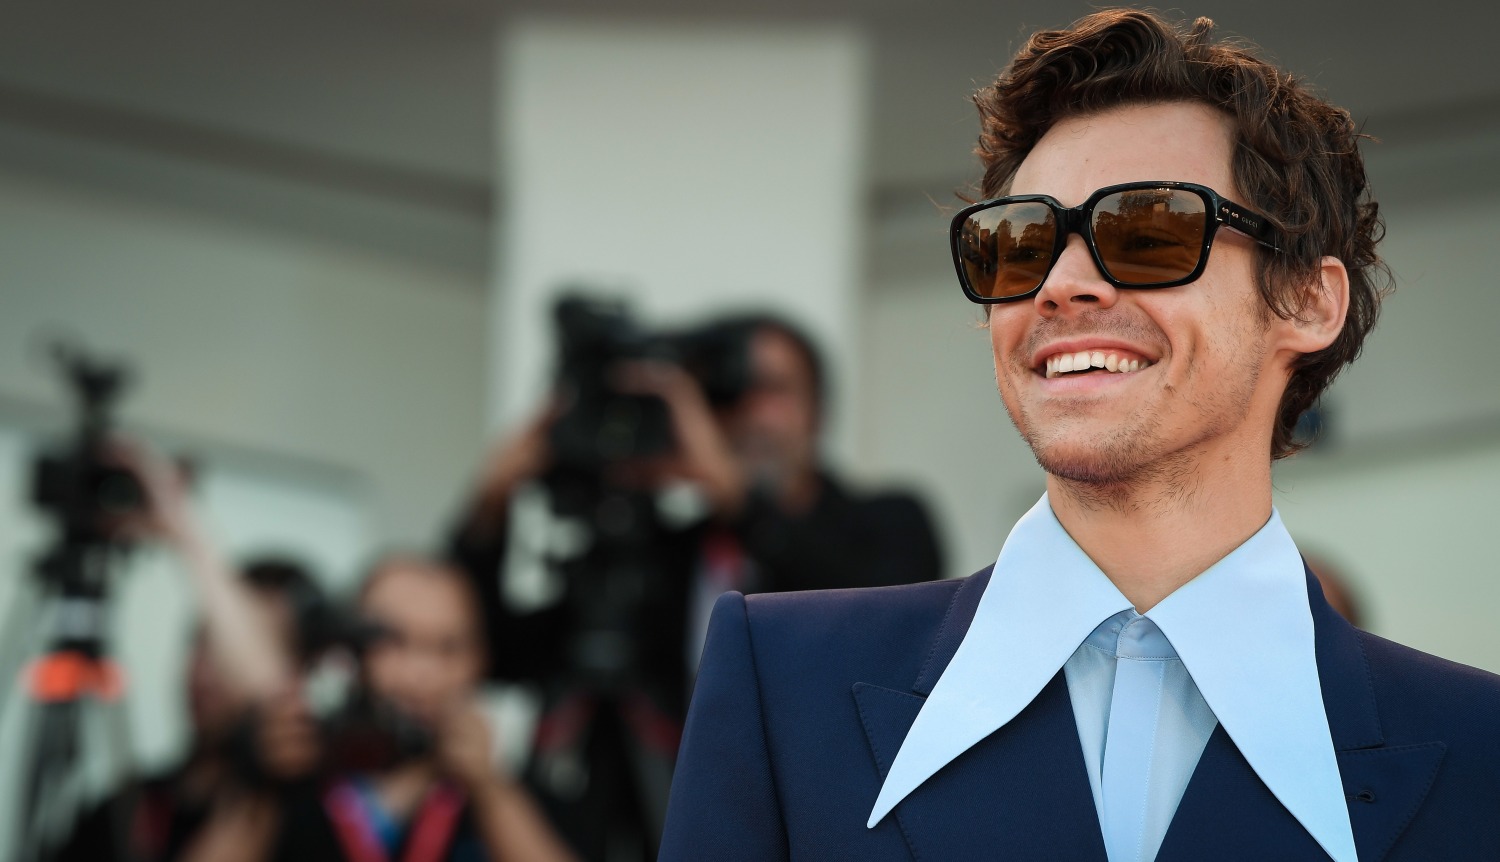 Harry Styles Breaks Silence About Chris Pine #SpitGate Incident